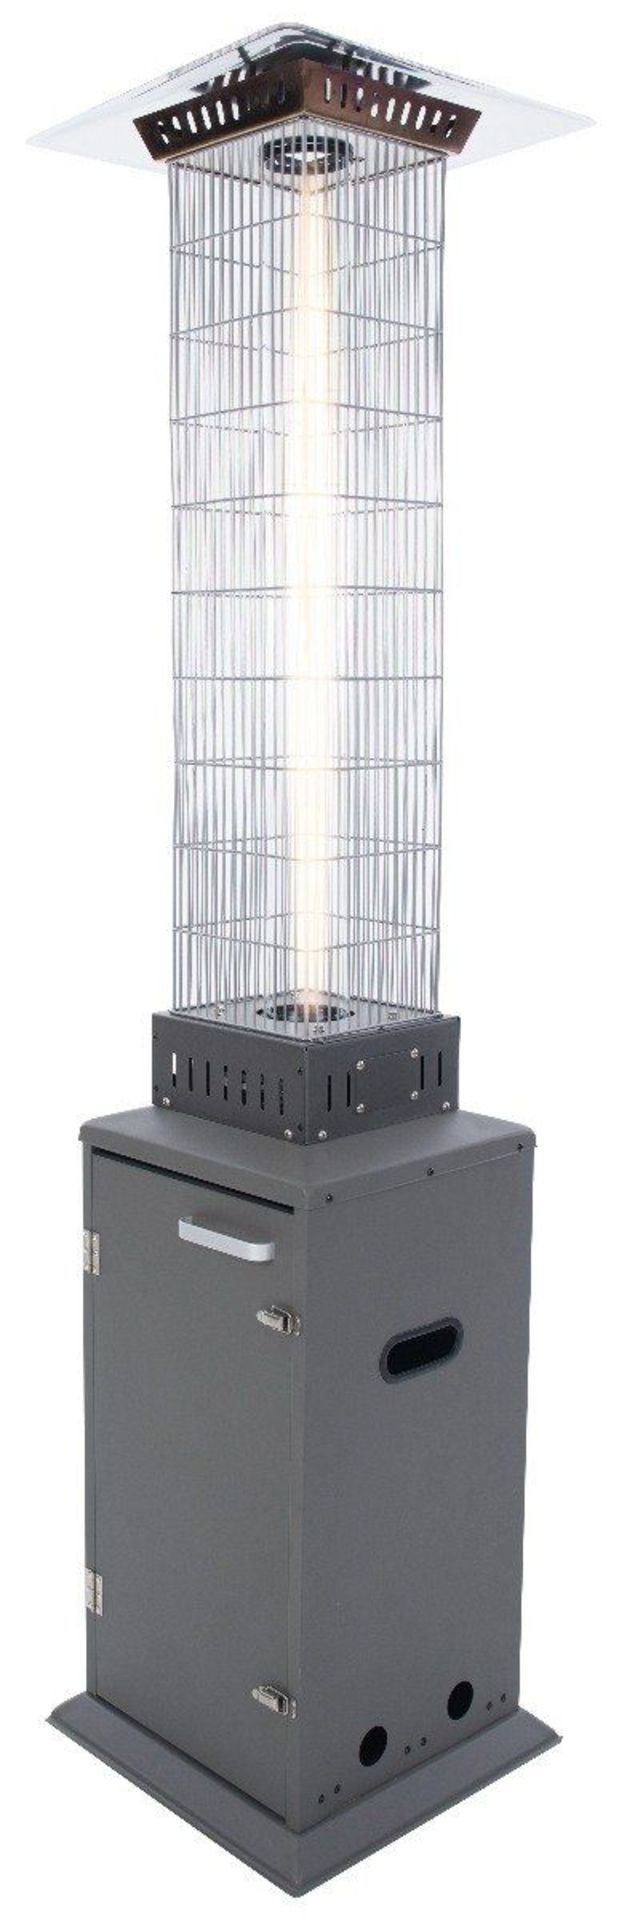 Brand New The Sunred Atria Flame Torch Gas Heater Grey RRP £499 is a high quality and efficient